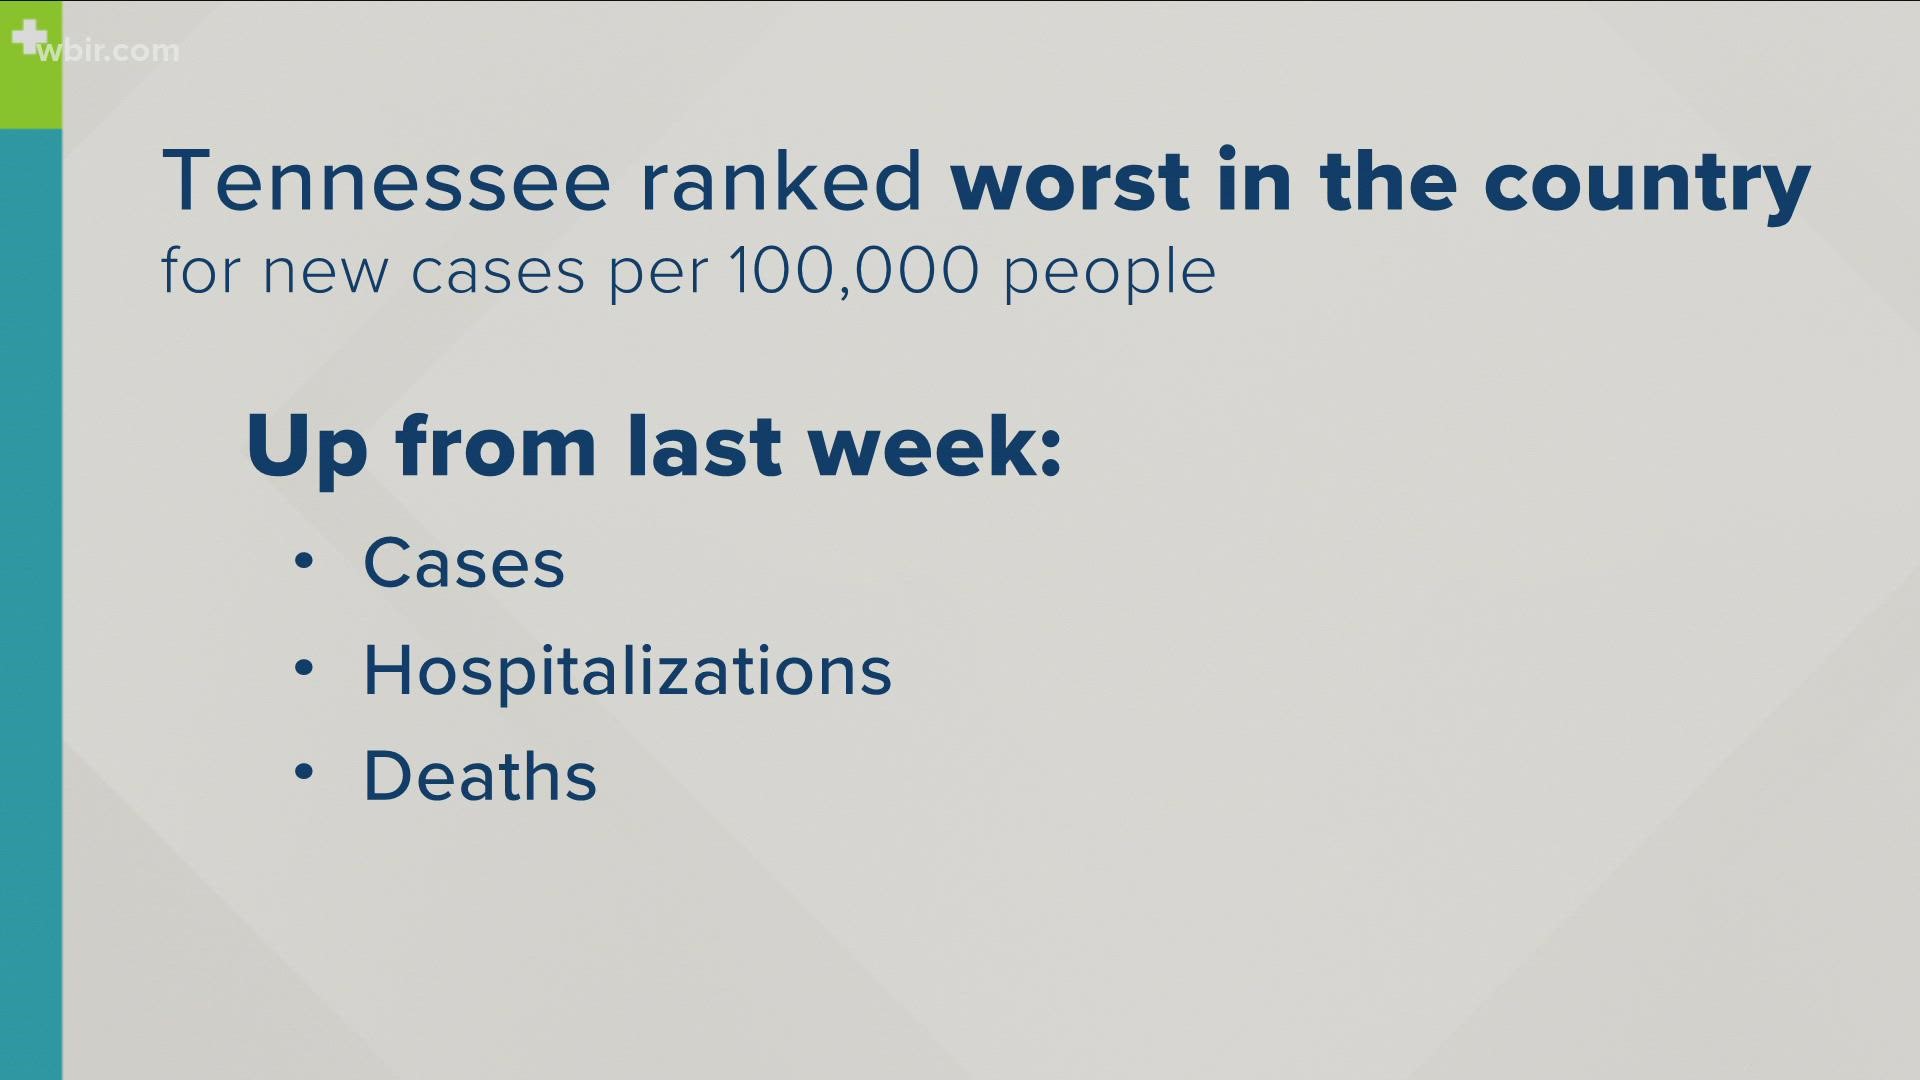 The rate of new cases, hospitalizations, and deaths are all significantly up from last week.